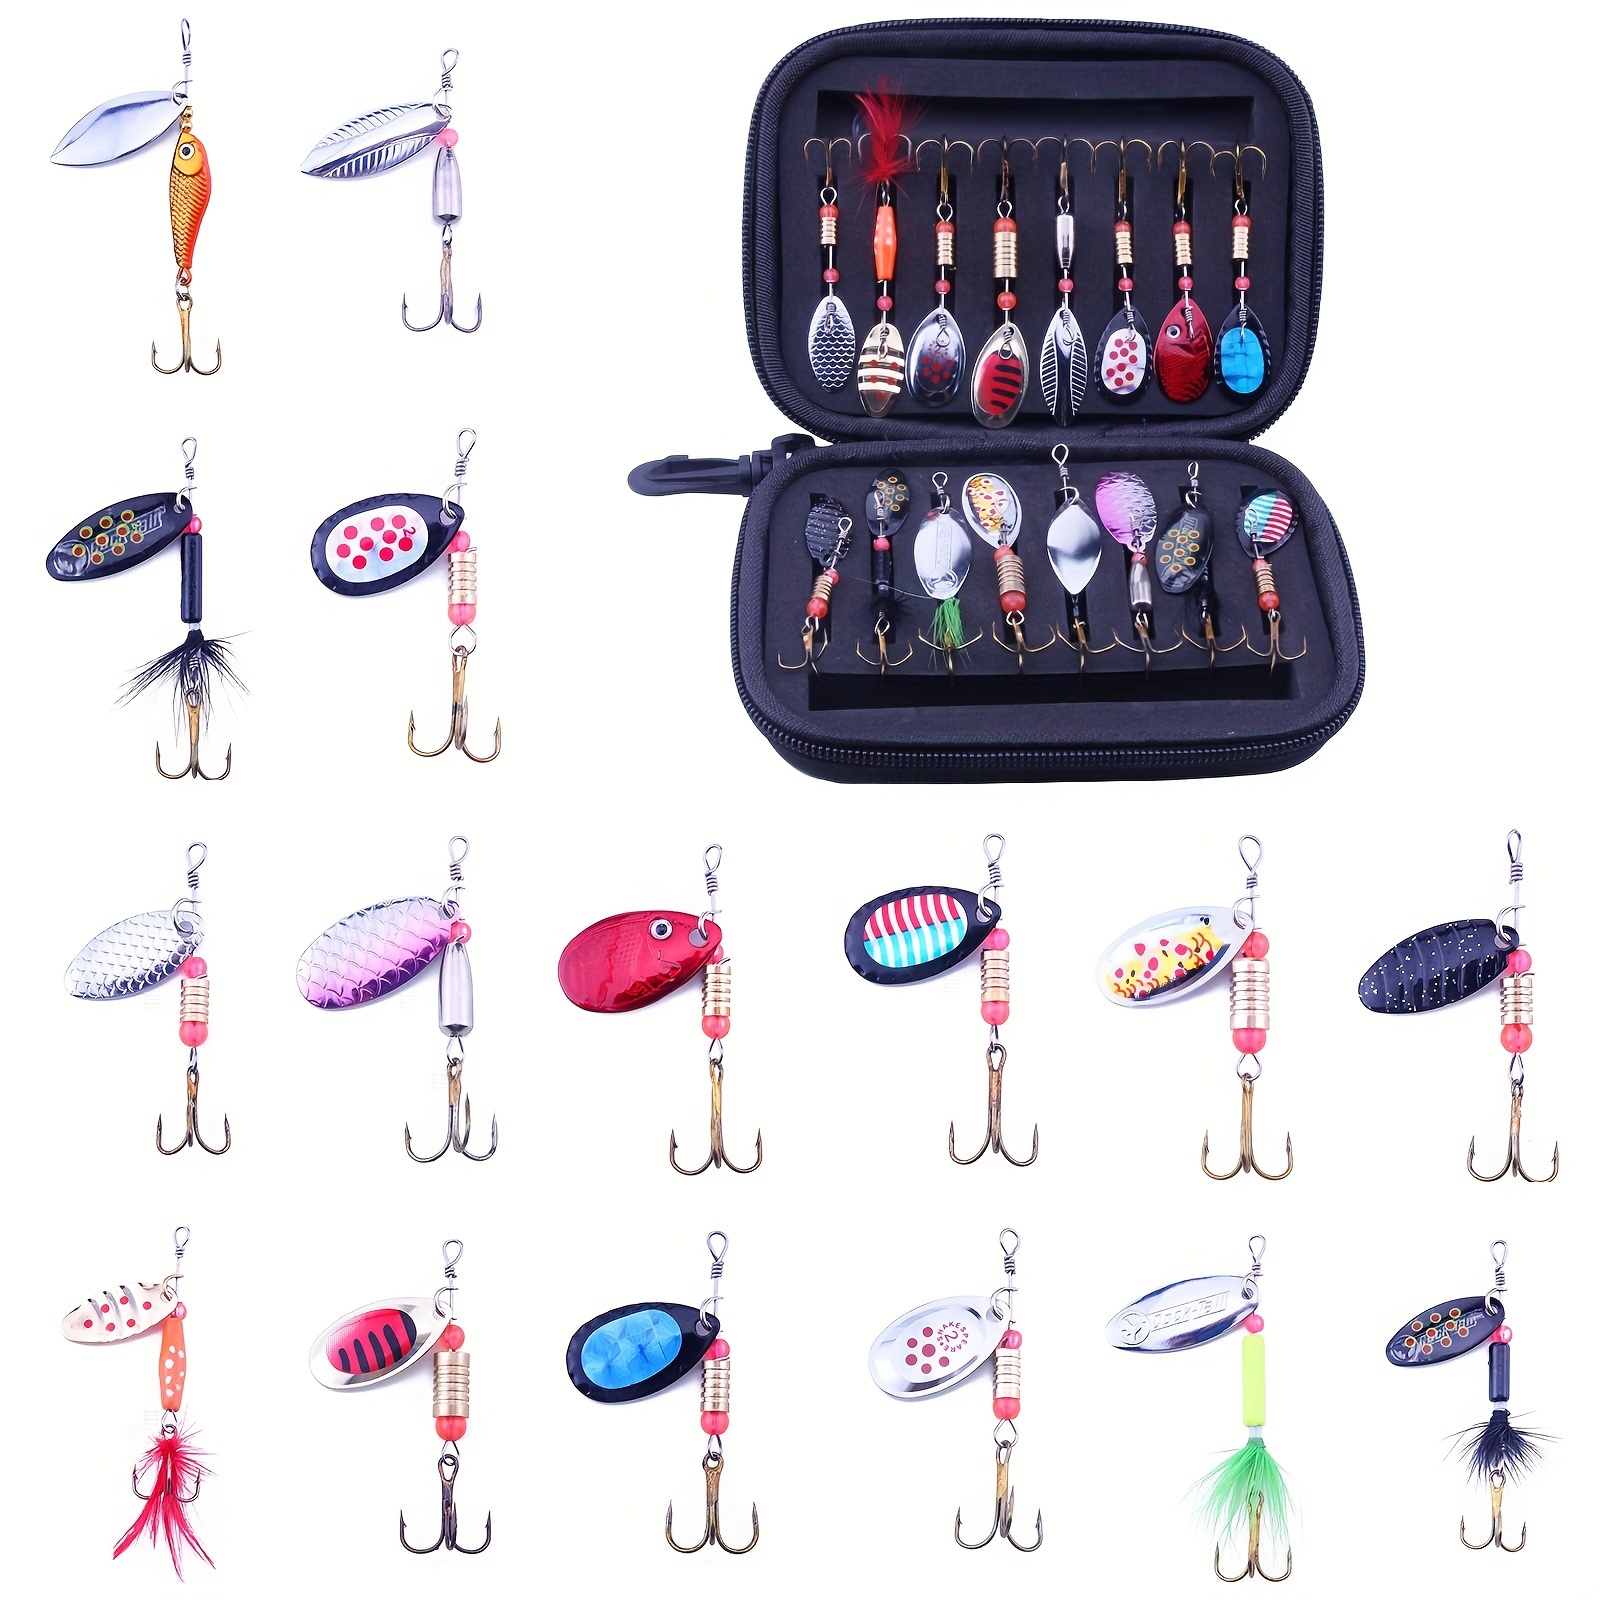 16pcs Portable Fishing Lures Kit - Inline Spinner Bait Set with Rooster  Spinnerbaits and Metal Spoon Lures for Trout, Bass, and Walleye - Includes  Car